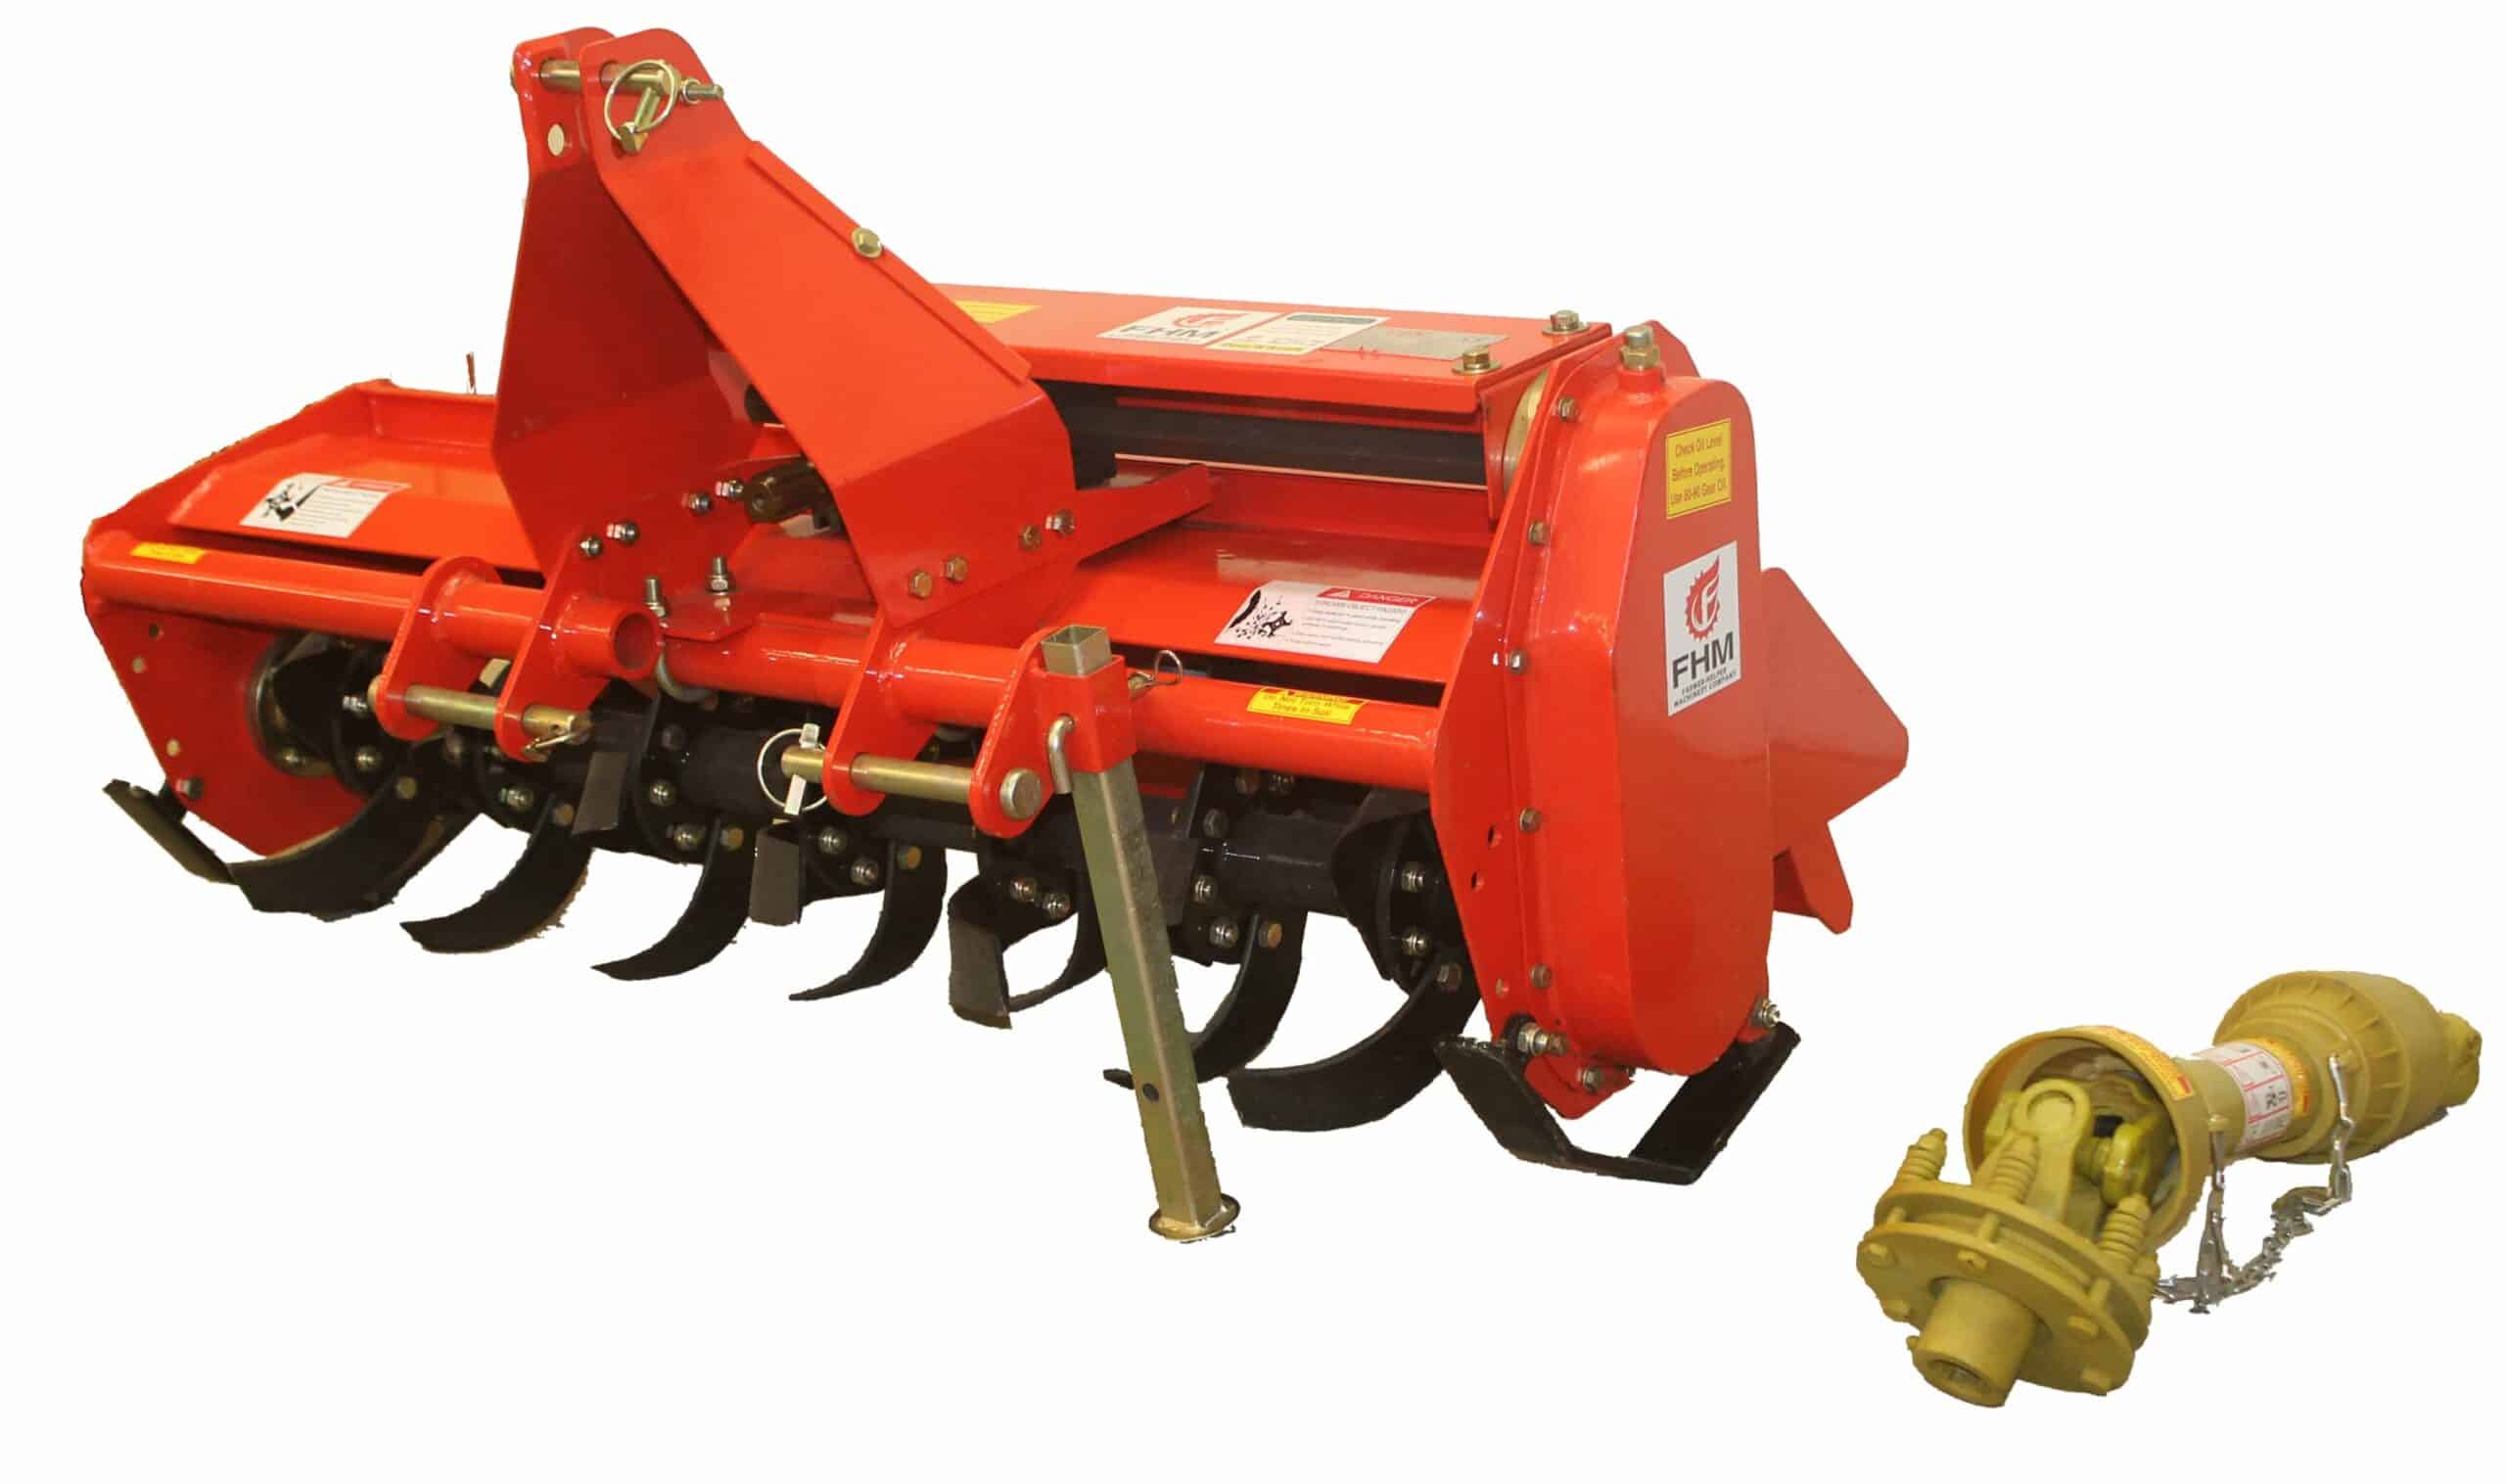 48" Offsetable 3-point Rotary Tiller FH-TL125 